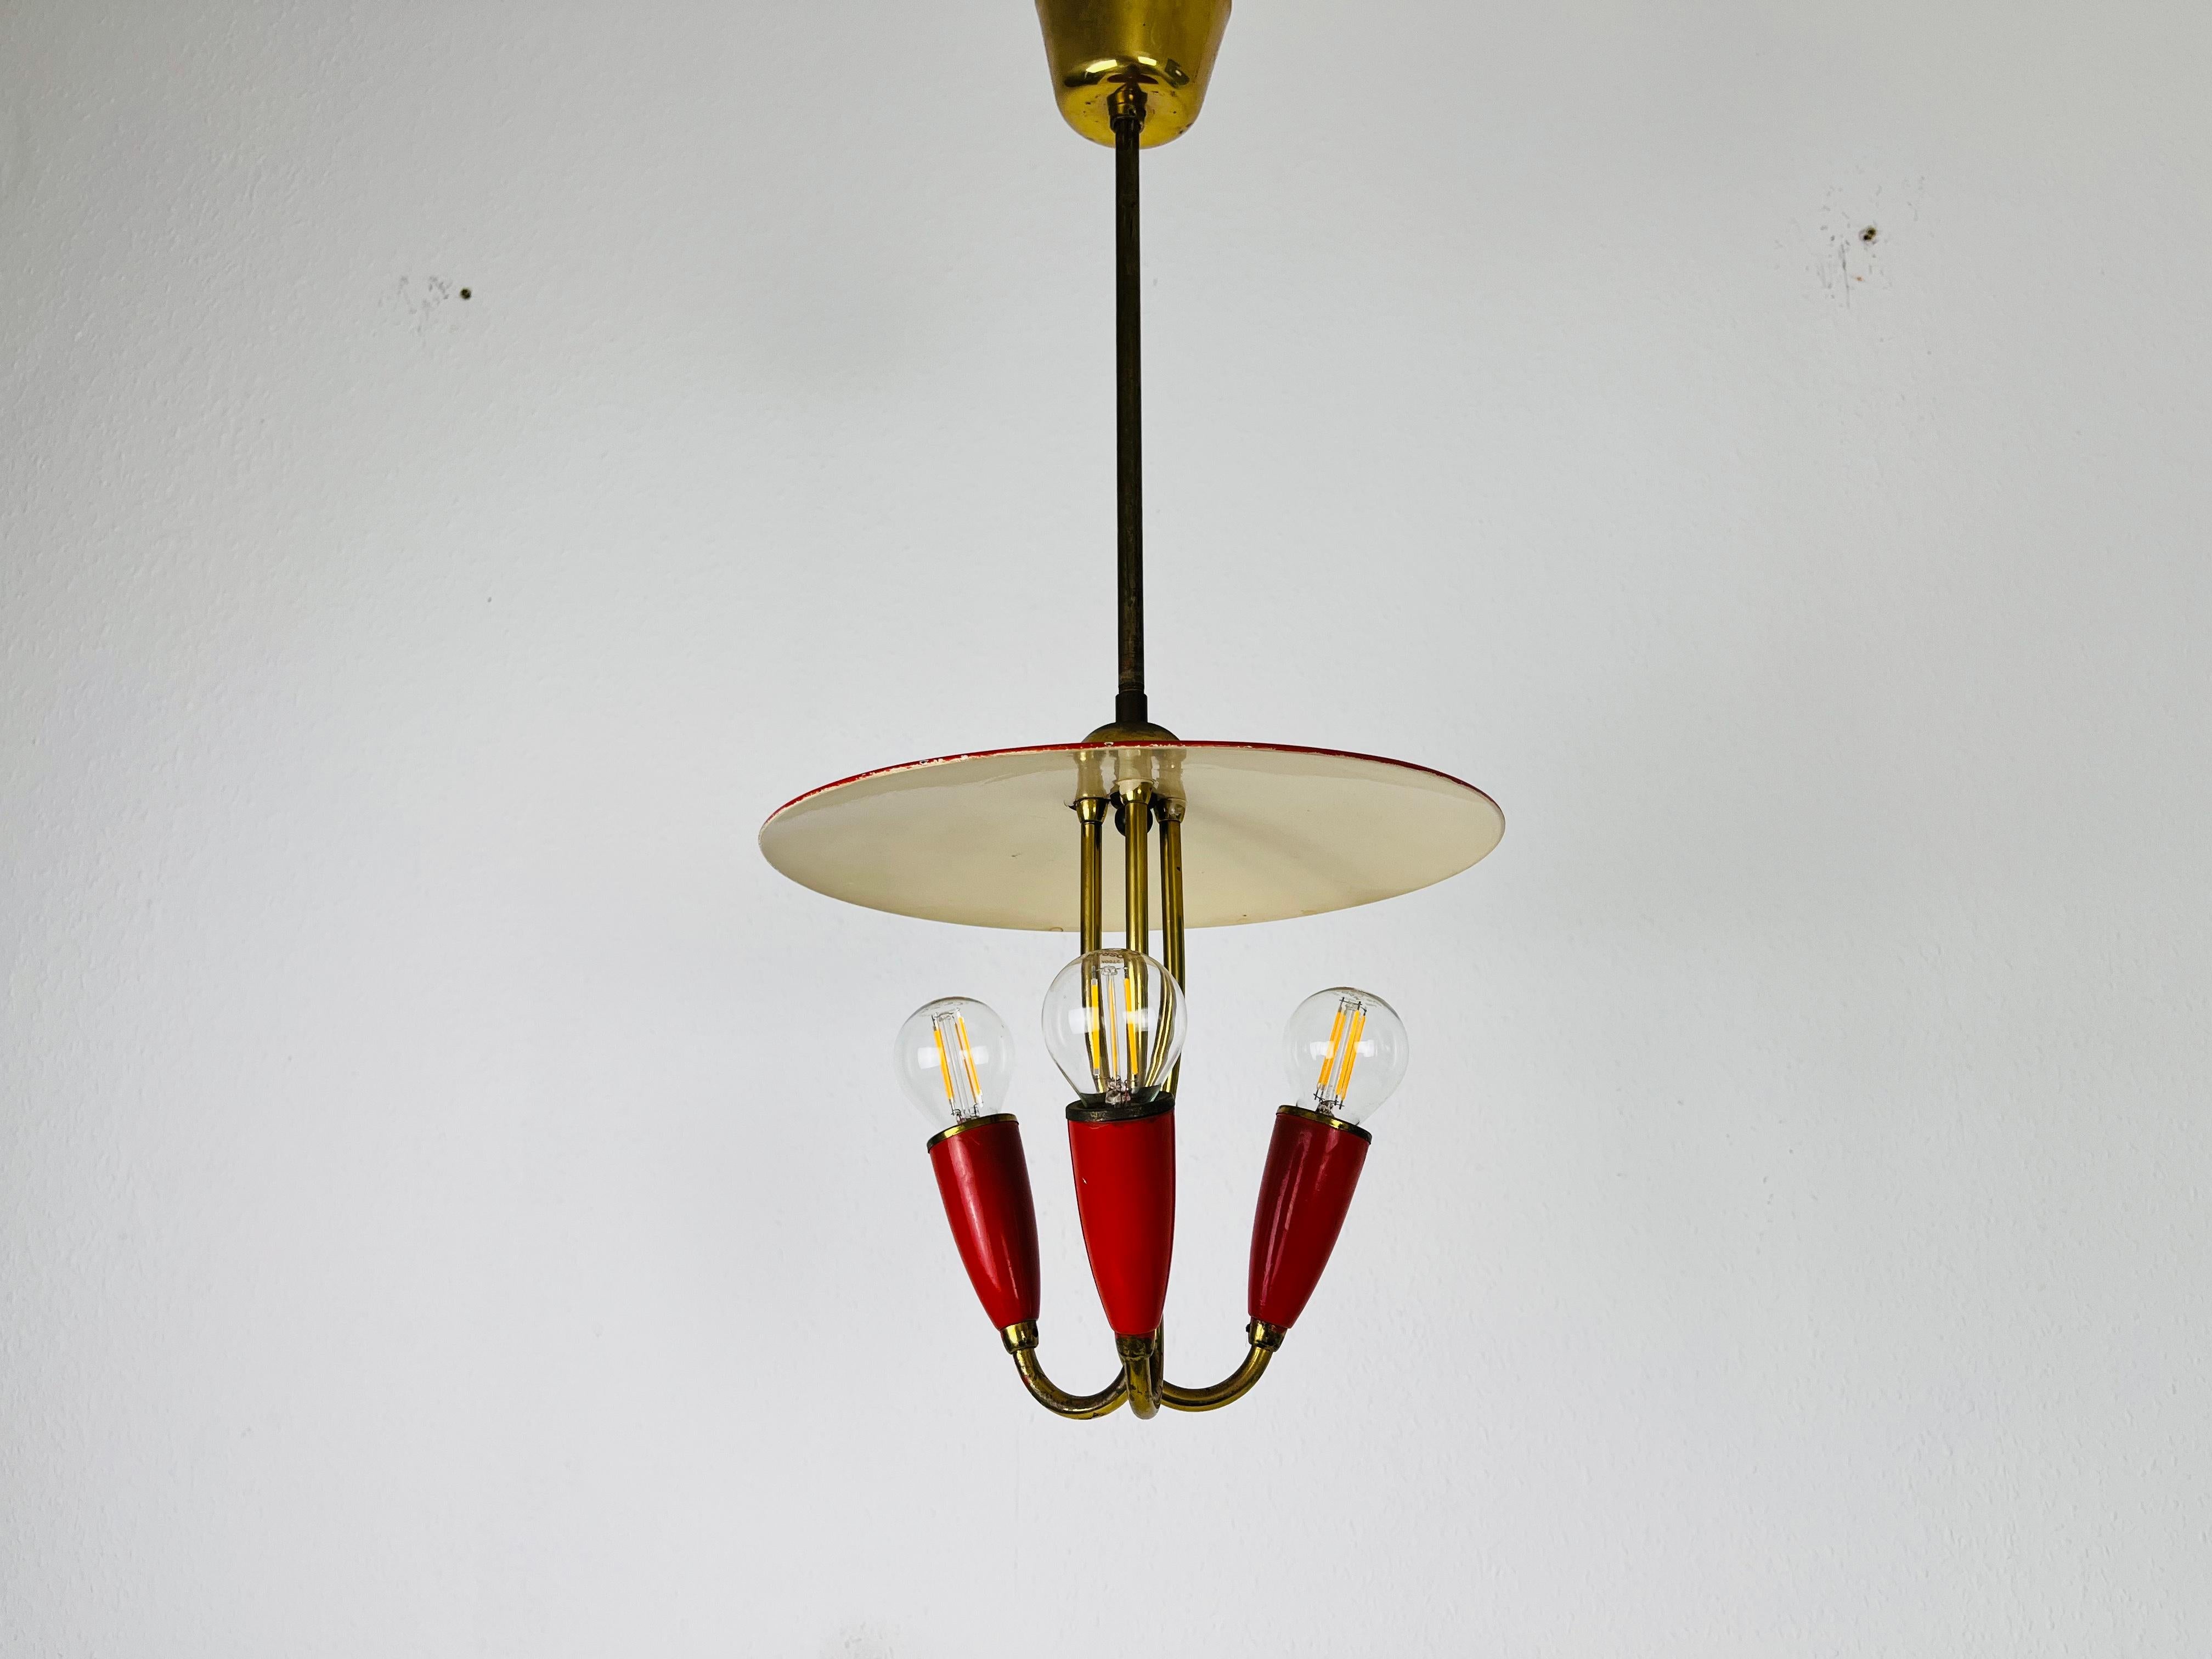 A Sputnik chandelier made in Italy in the 1960s. It is fascinating with its three red arms, each of it with an E14 light bulb. 

The light requires 3 E14 light bulbs. Works with both 120/220V. Good vintage condition.

Free worldwide express